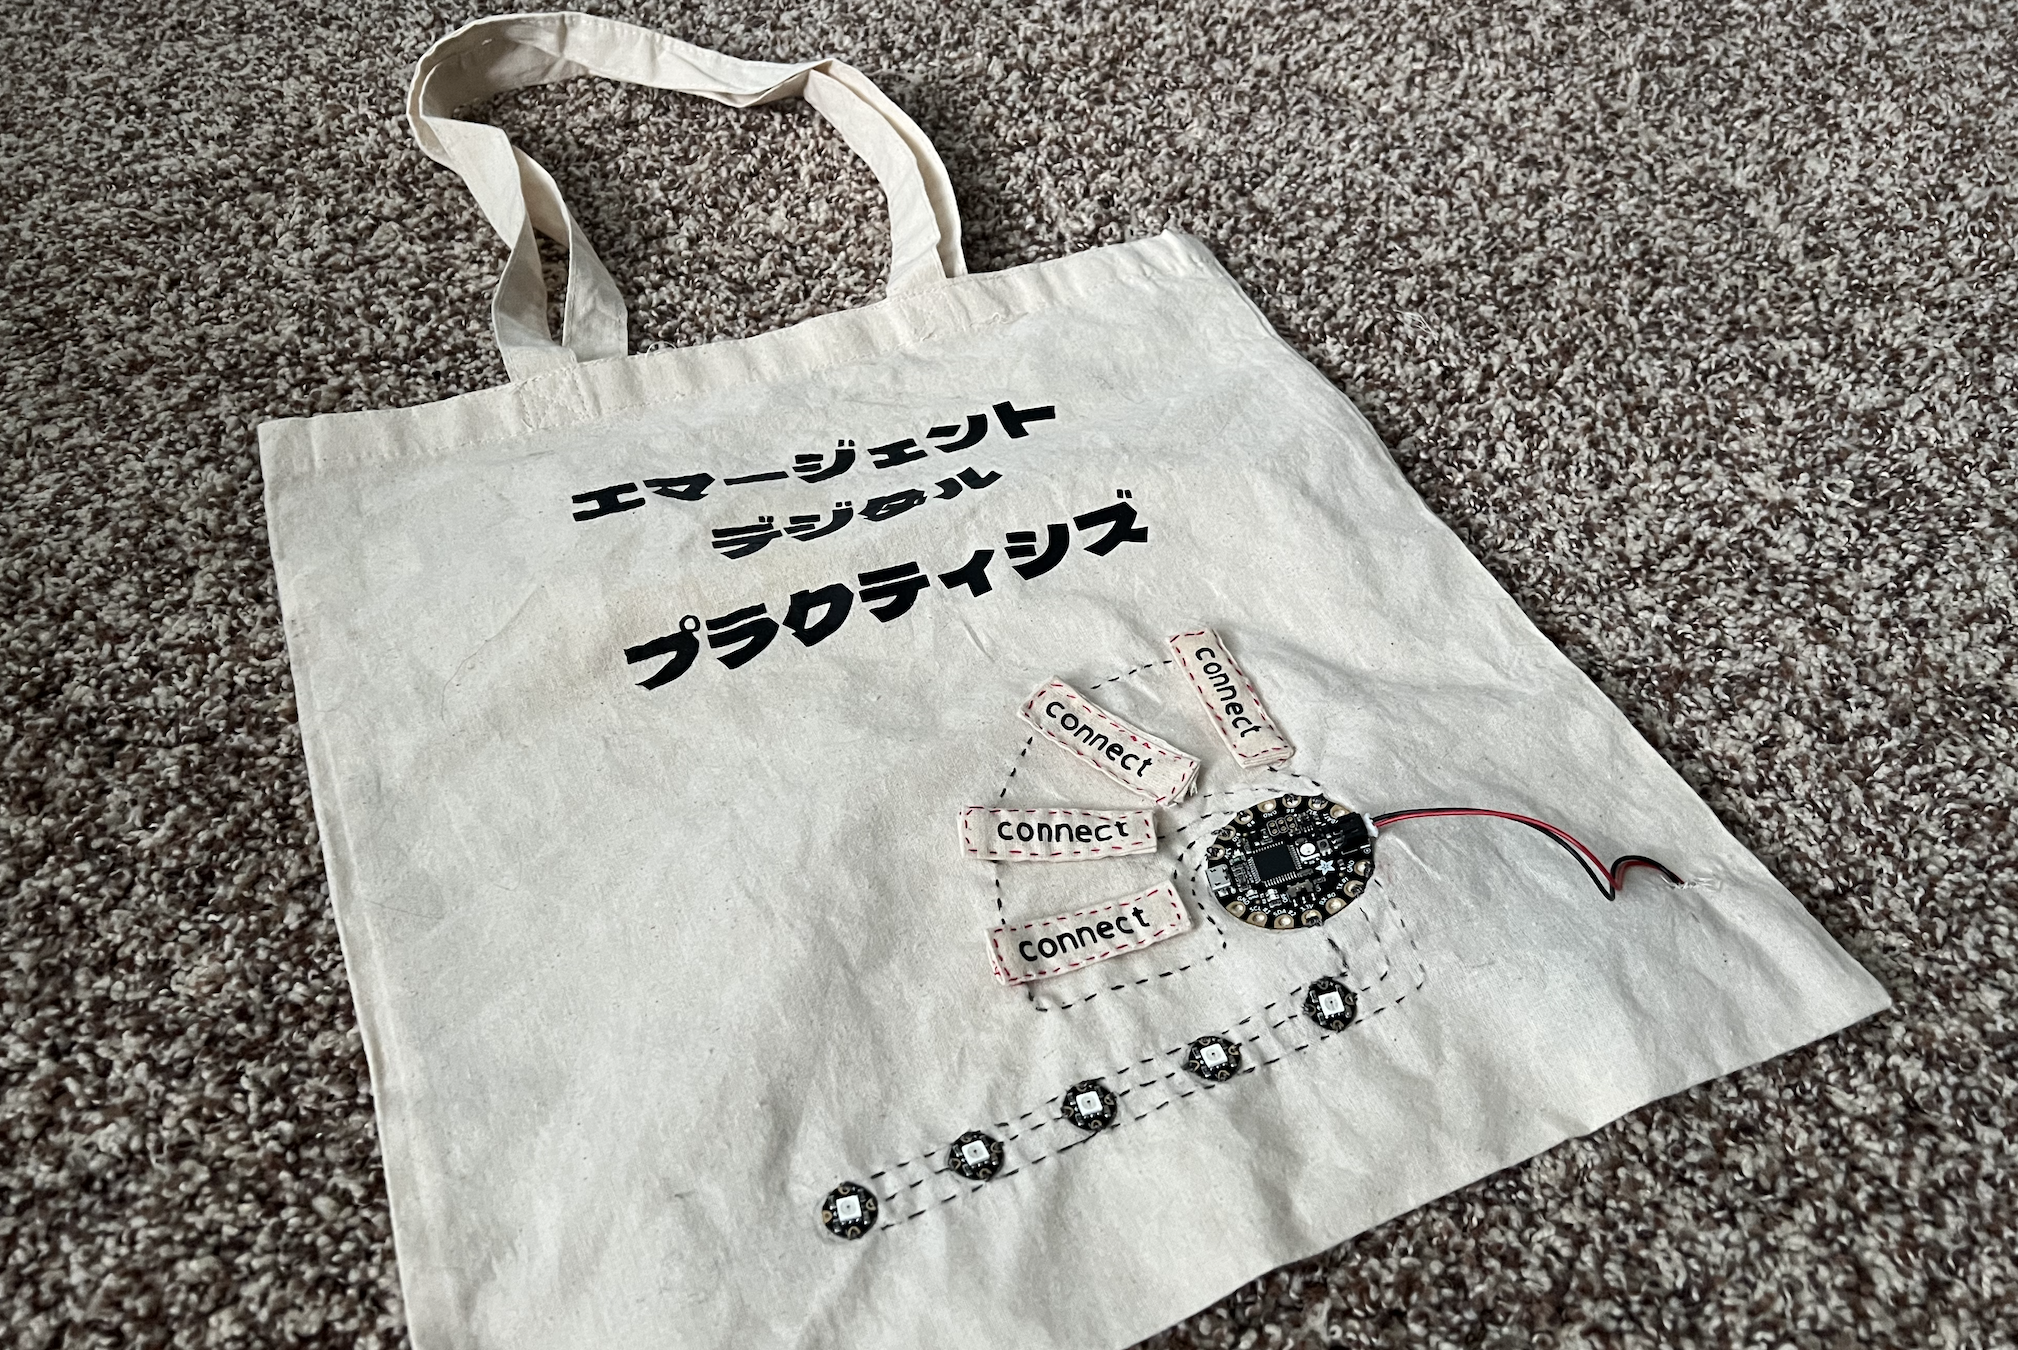 tote bag with circuits, LEDs and snaps. Emergent Digital Practices written in Japanese at the top